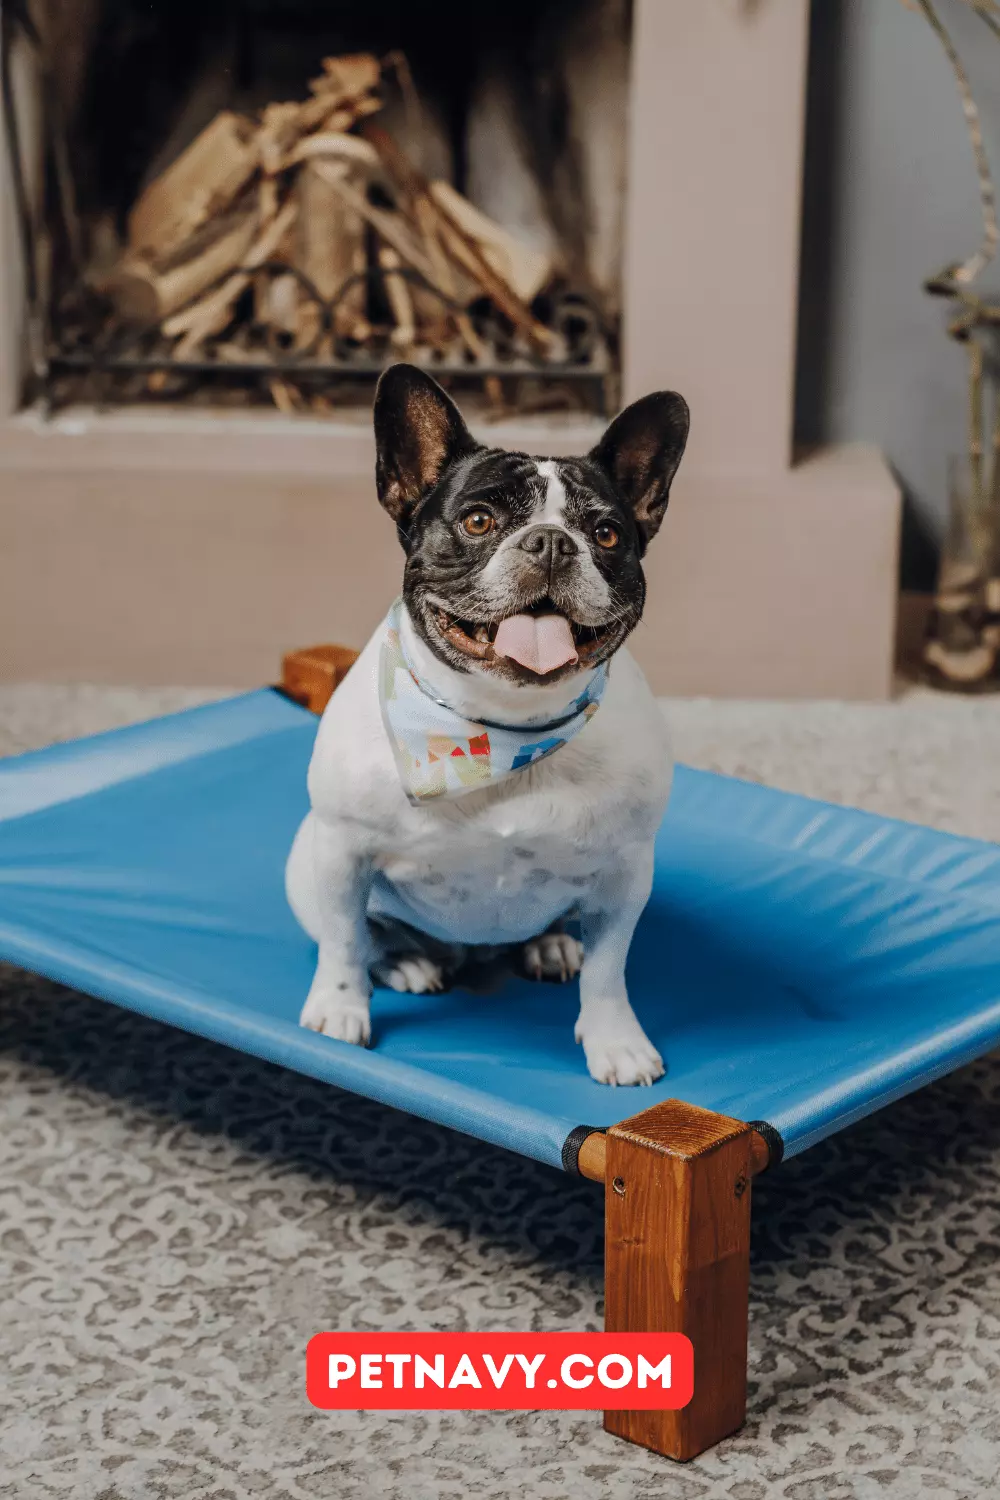 10 Best Selling Raised or Elevated Dog Beds